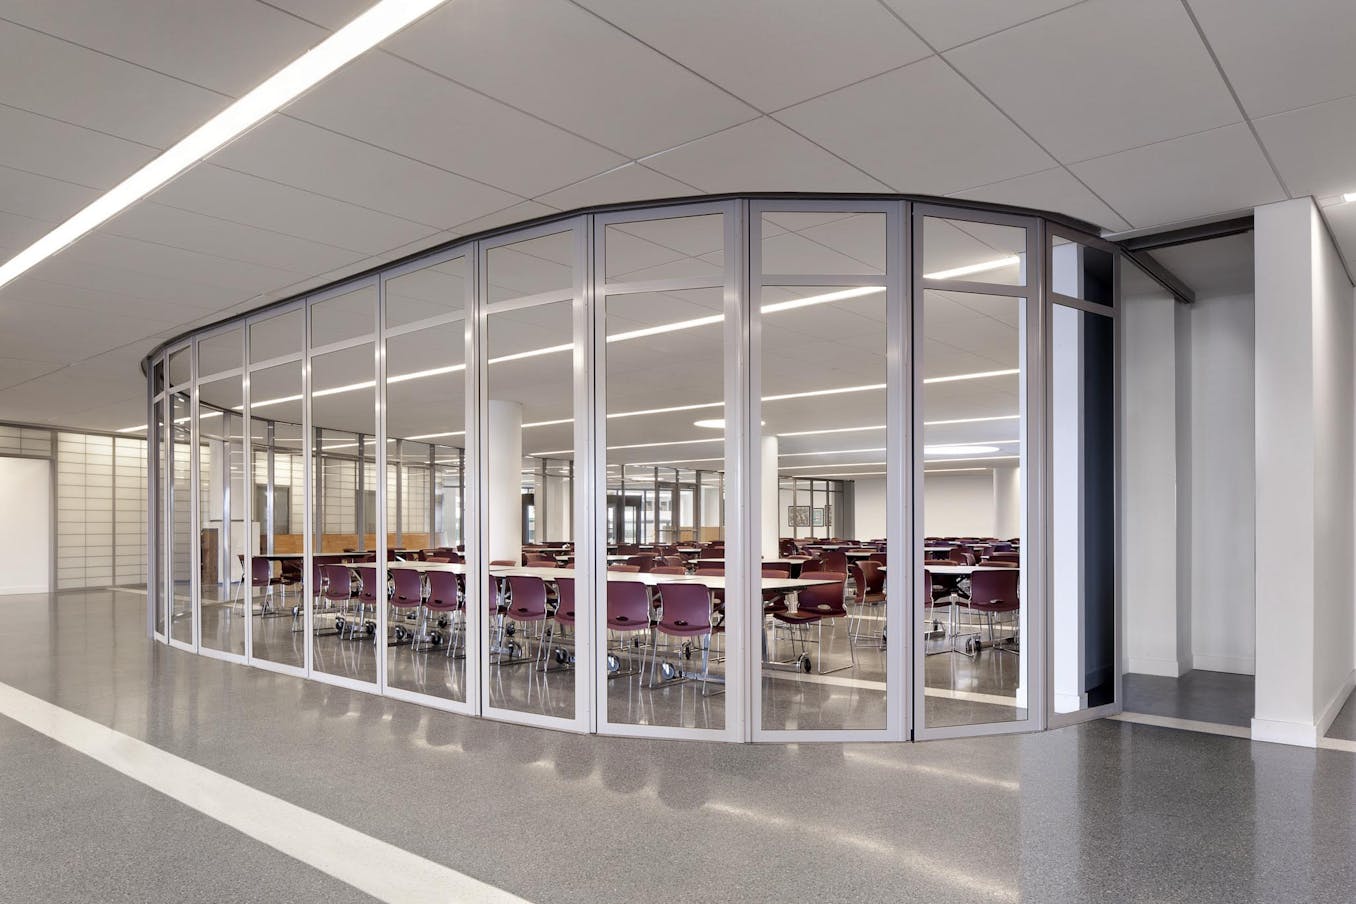 commercial collaborative learning space in school design - segmented curved sliding walls closed exterior